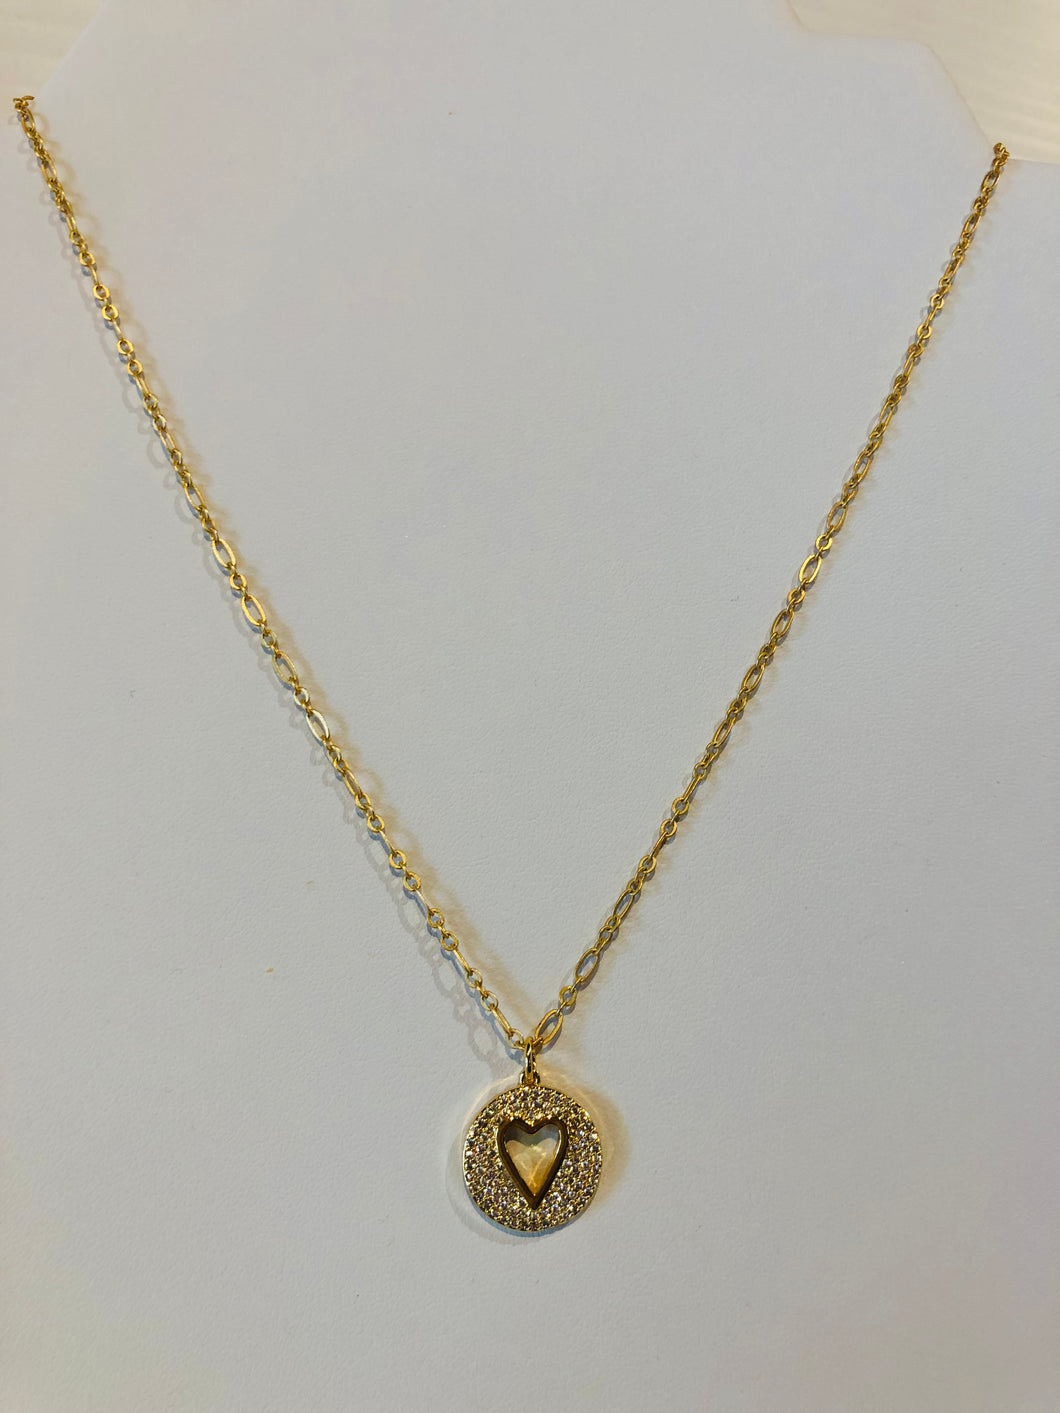 Mini Heart in CZ stones on Gold Circle 14